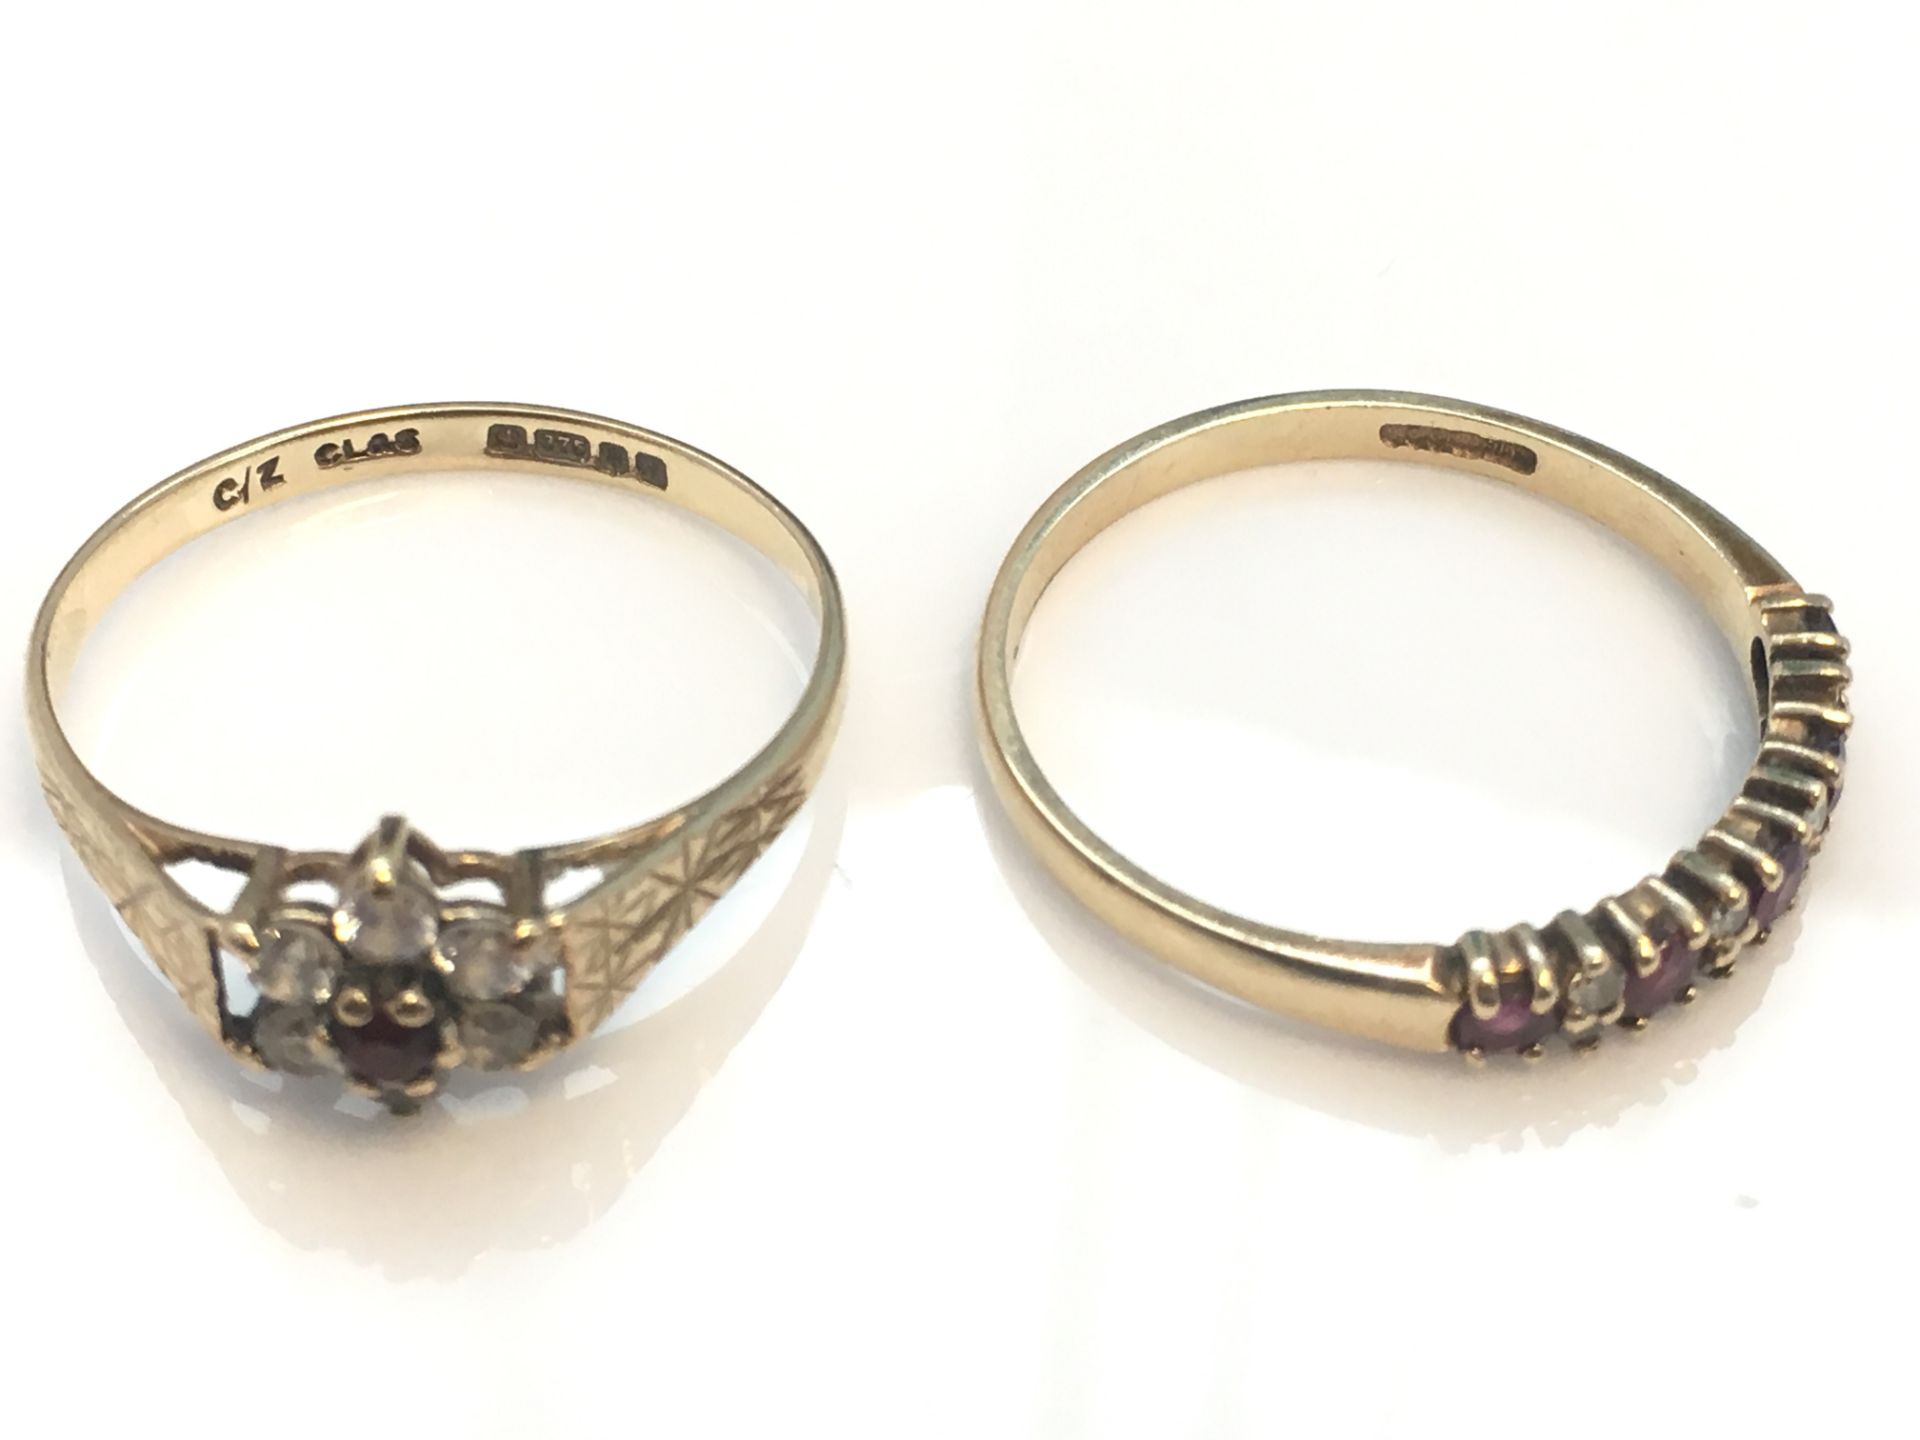 Two 9ct gold dress rings - Image 2 of 4